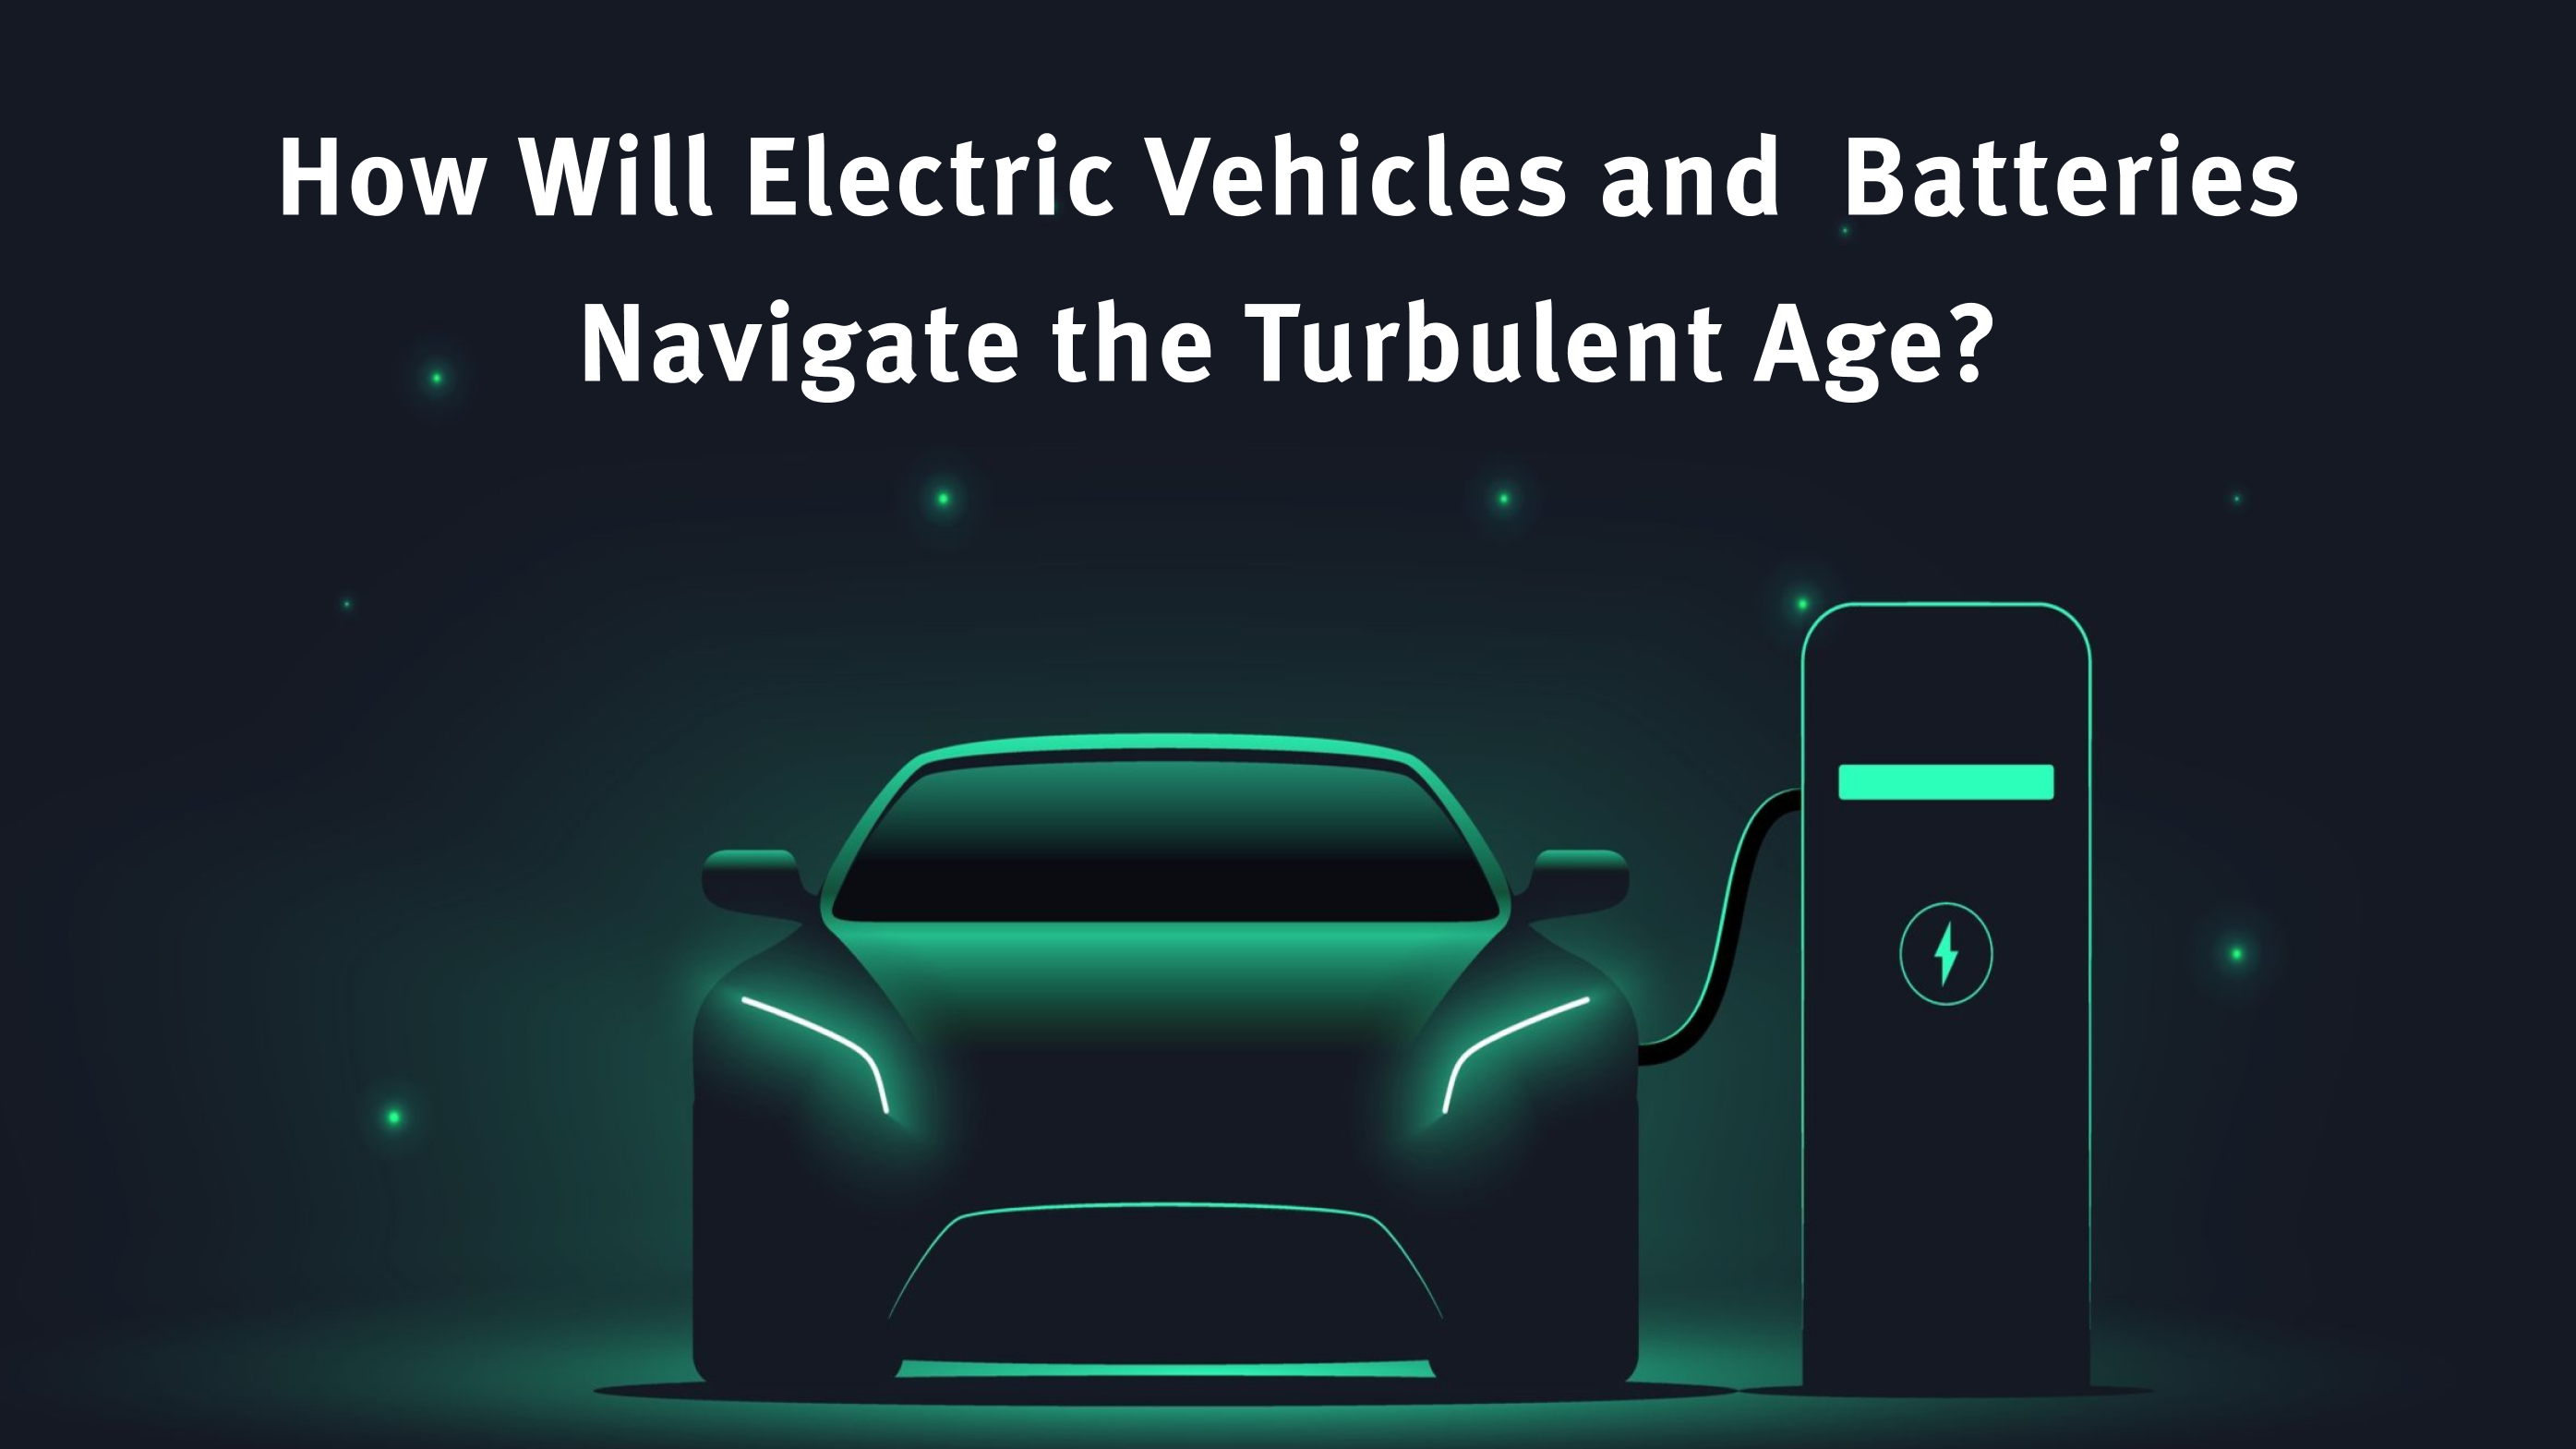 How Will Electric Vehicles and Batteries Navigate the Turbulent Age?